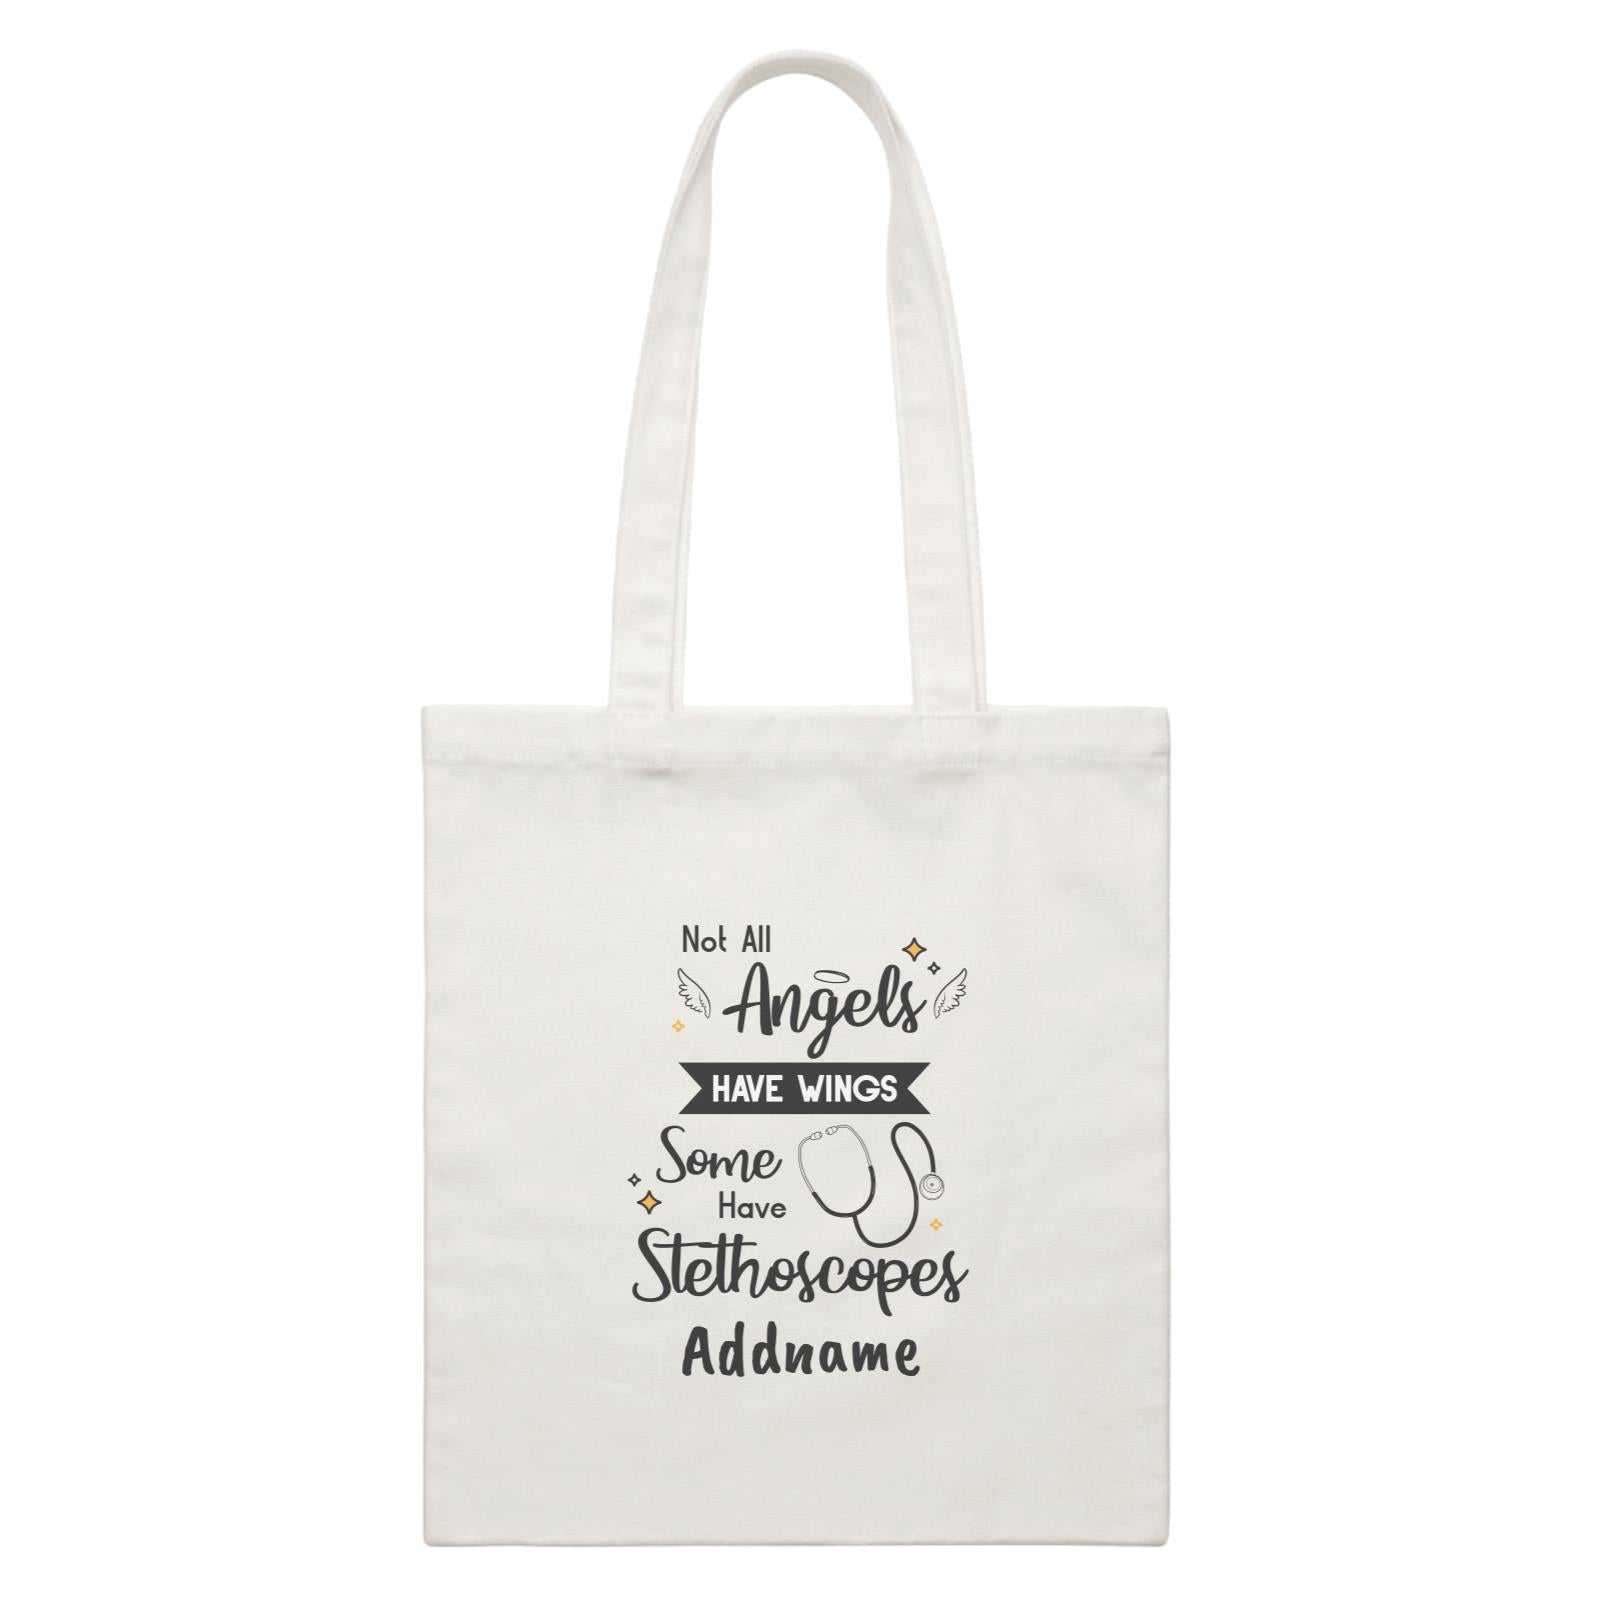 Not All Angels Have Wings, Some Have Stethoscopes White Canvas Bag